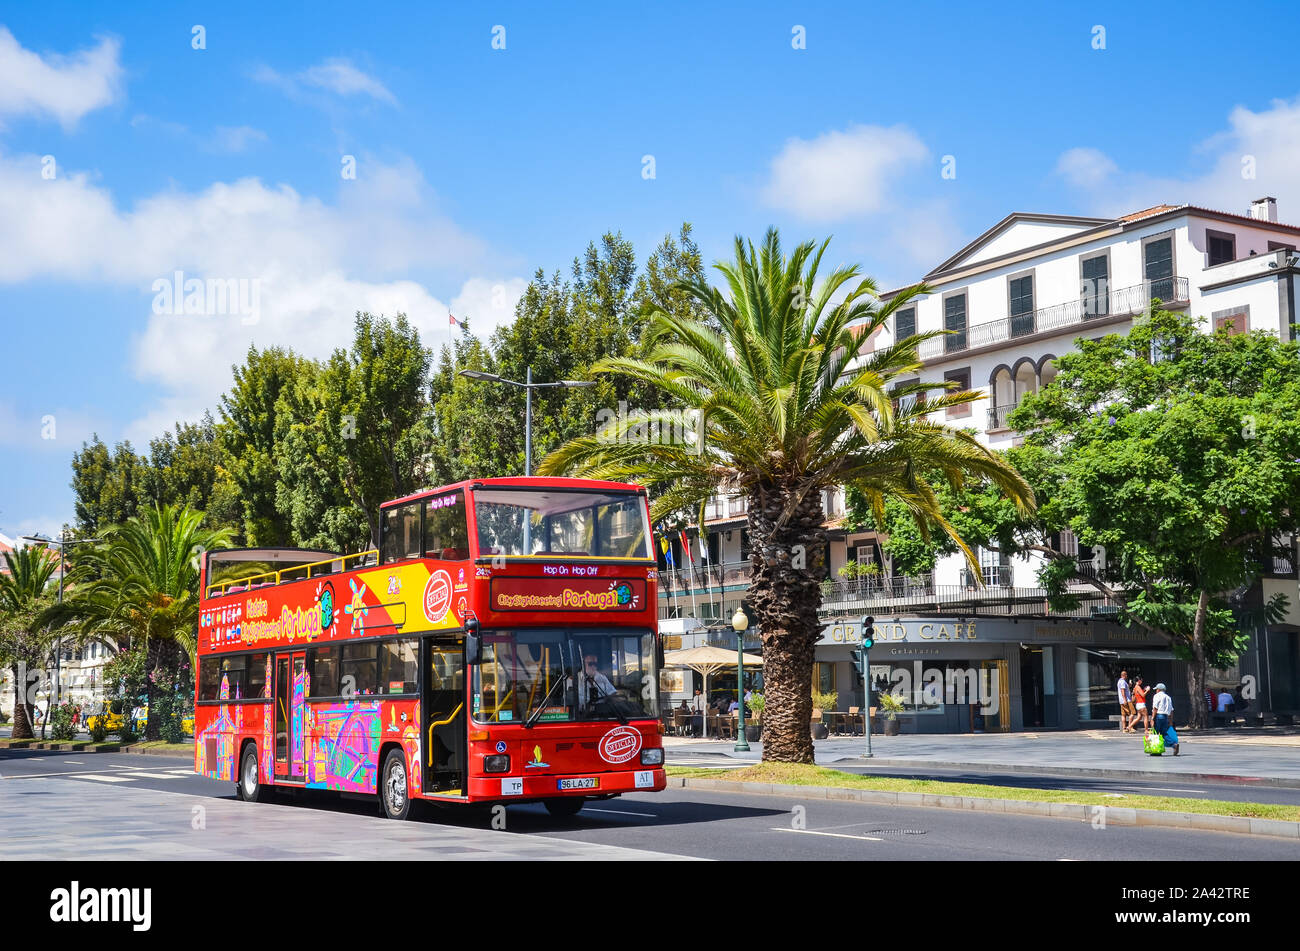 Funchal, Madeira, Portugal - Sep 10, 2019: Red double-decker tourist bus driving people around the Madeiran capital city. Hop on hop off buses, transport service. Tourist attraction. Vacation spot. Stock Photo